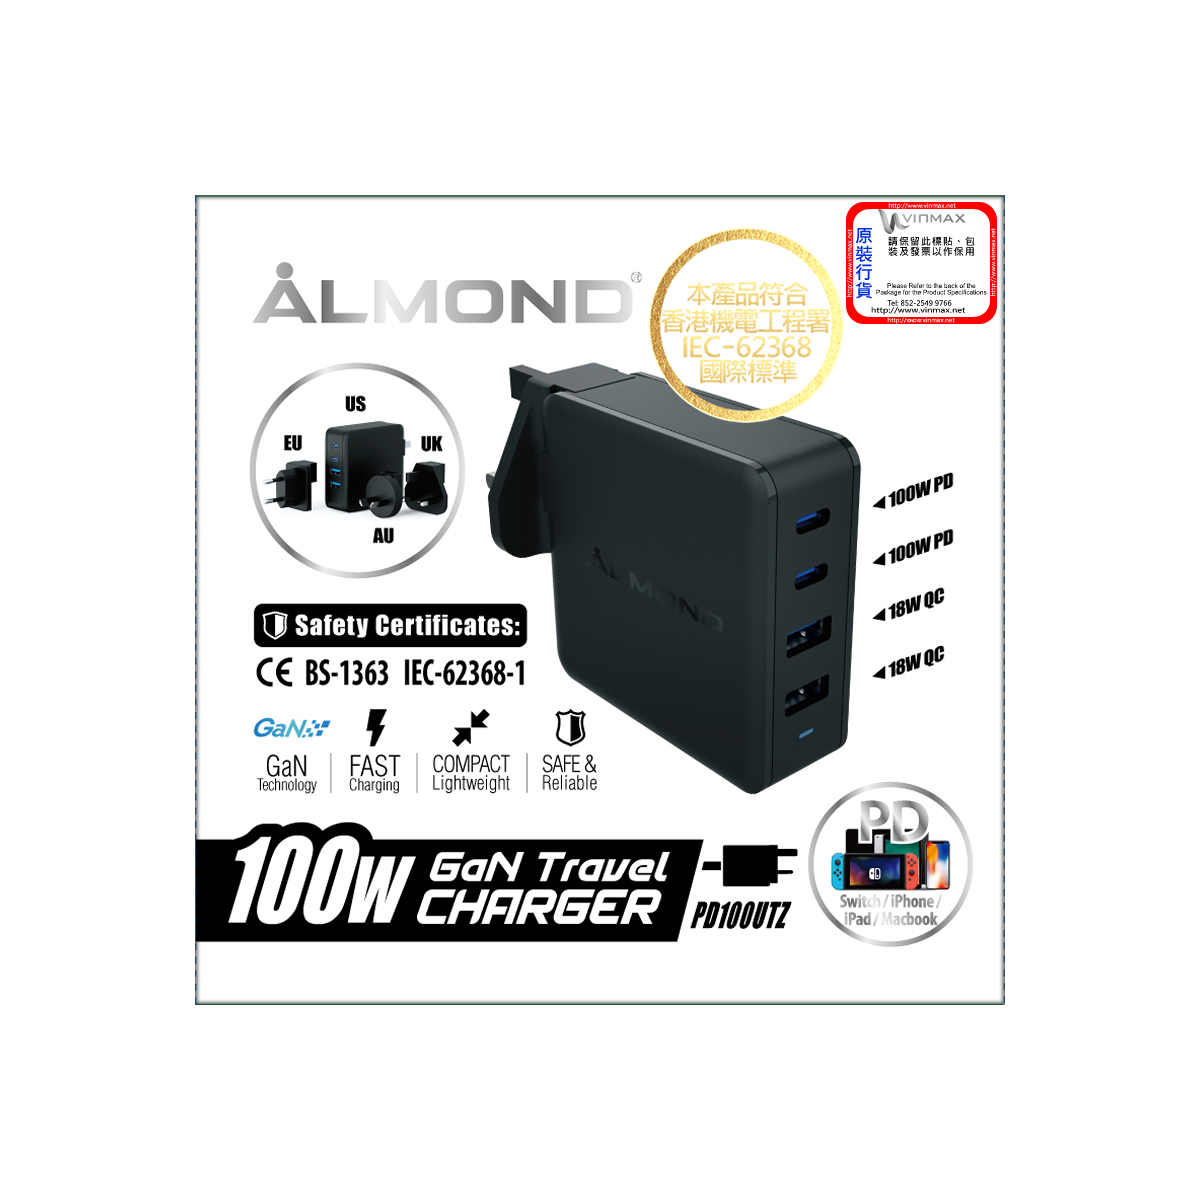 ALMOND PD100UTZ 100W Travel Charger, , large image number 4